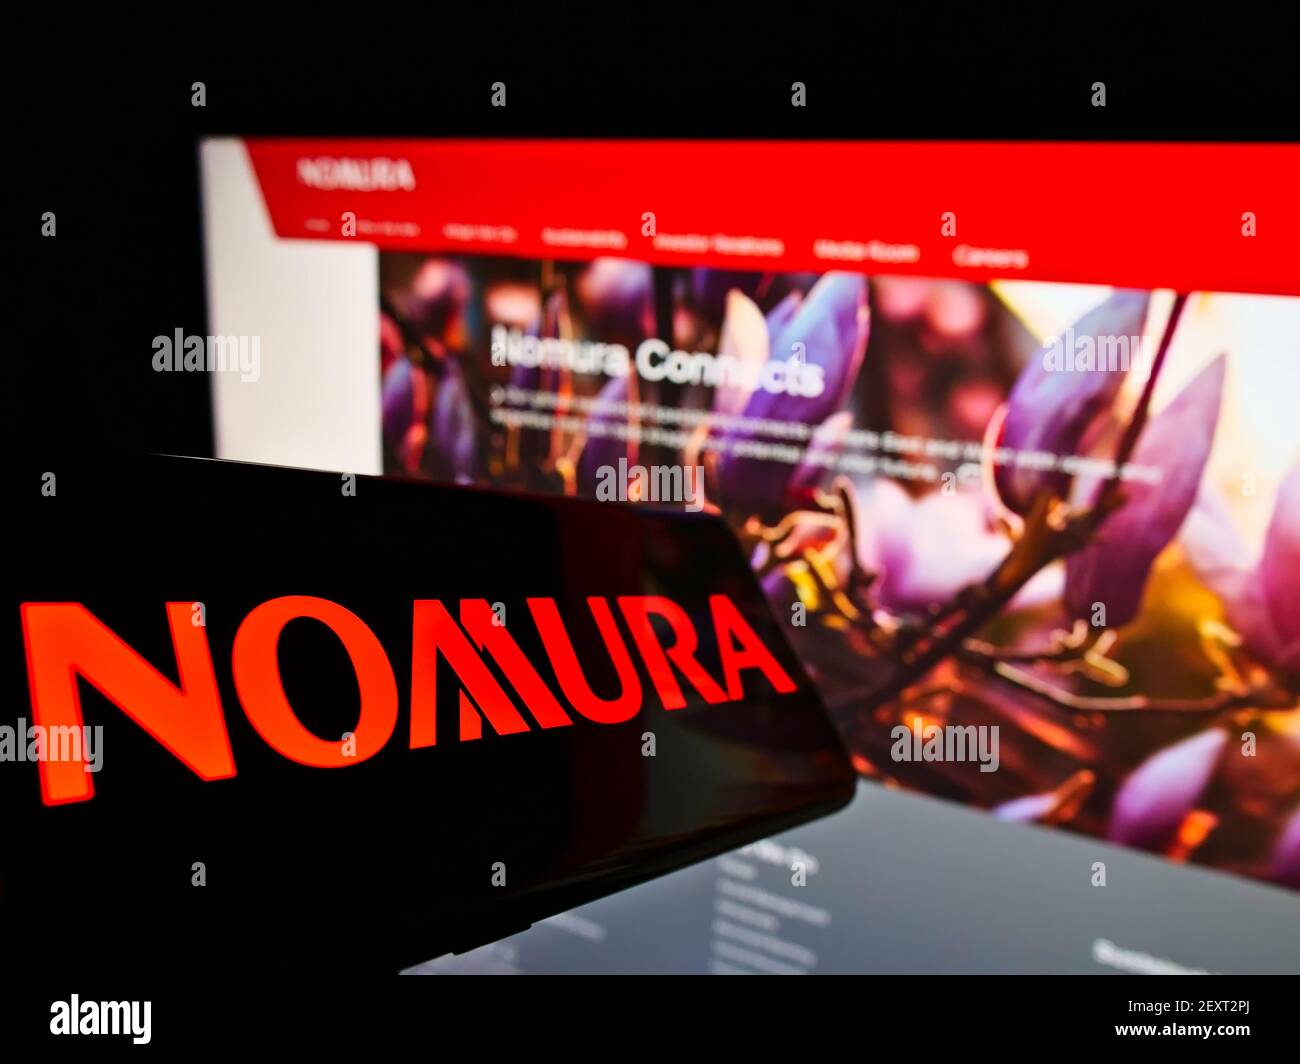 Cellphone with logo of Japanese financial company Nomura Holdings K.K. on screen in front of business website. Focus on center of phone display. Stock Photo